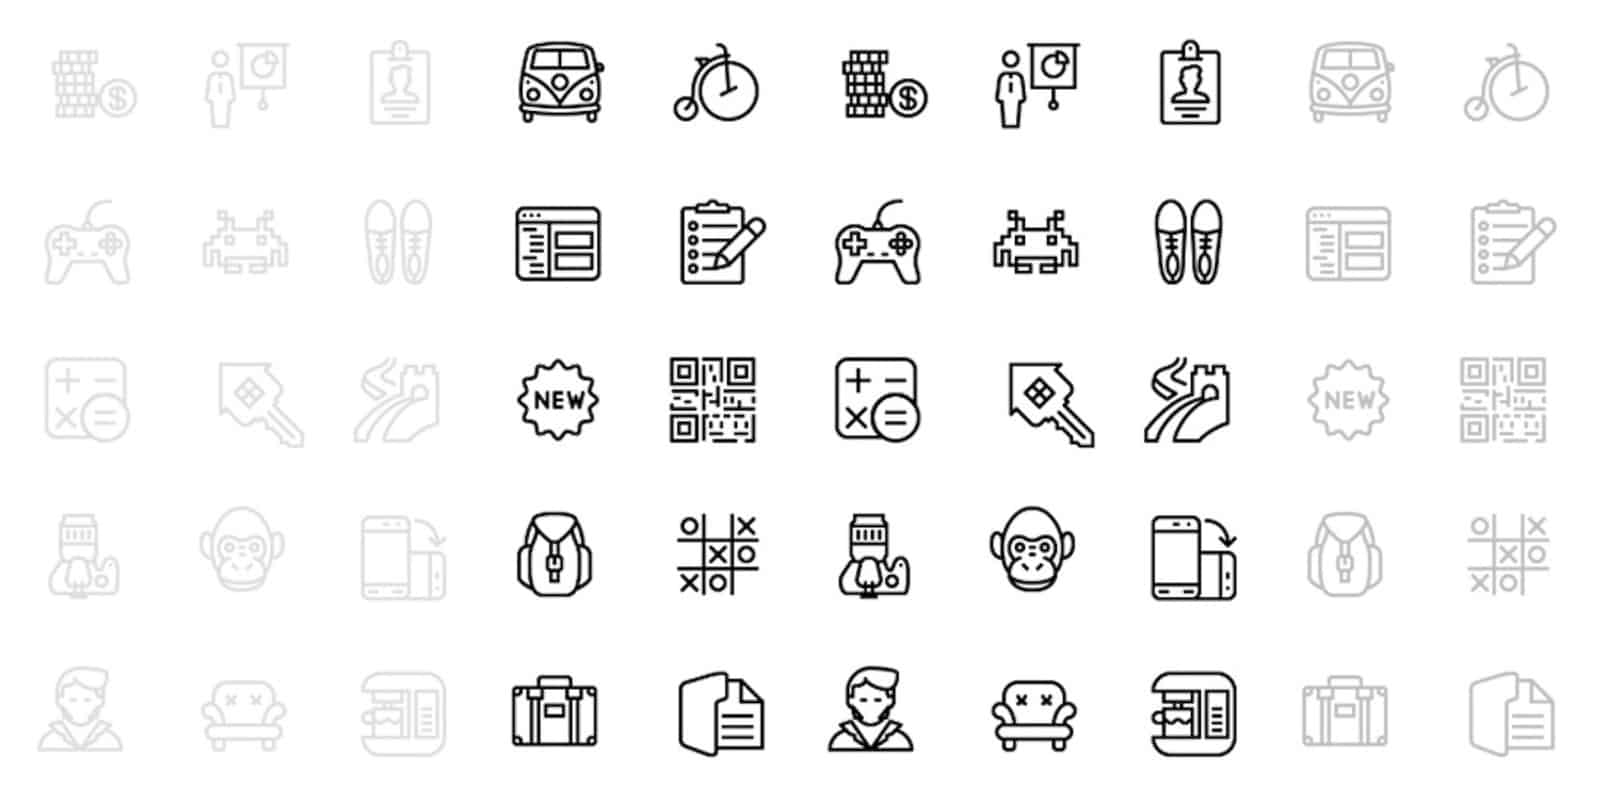 This membership offers lifetime access to a massive library of top-shelf icon assets, along with all future updates.